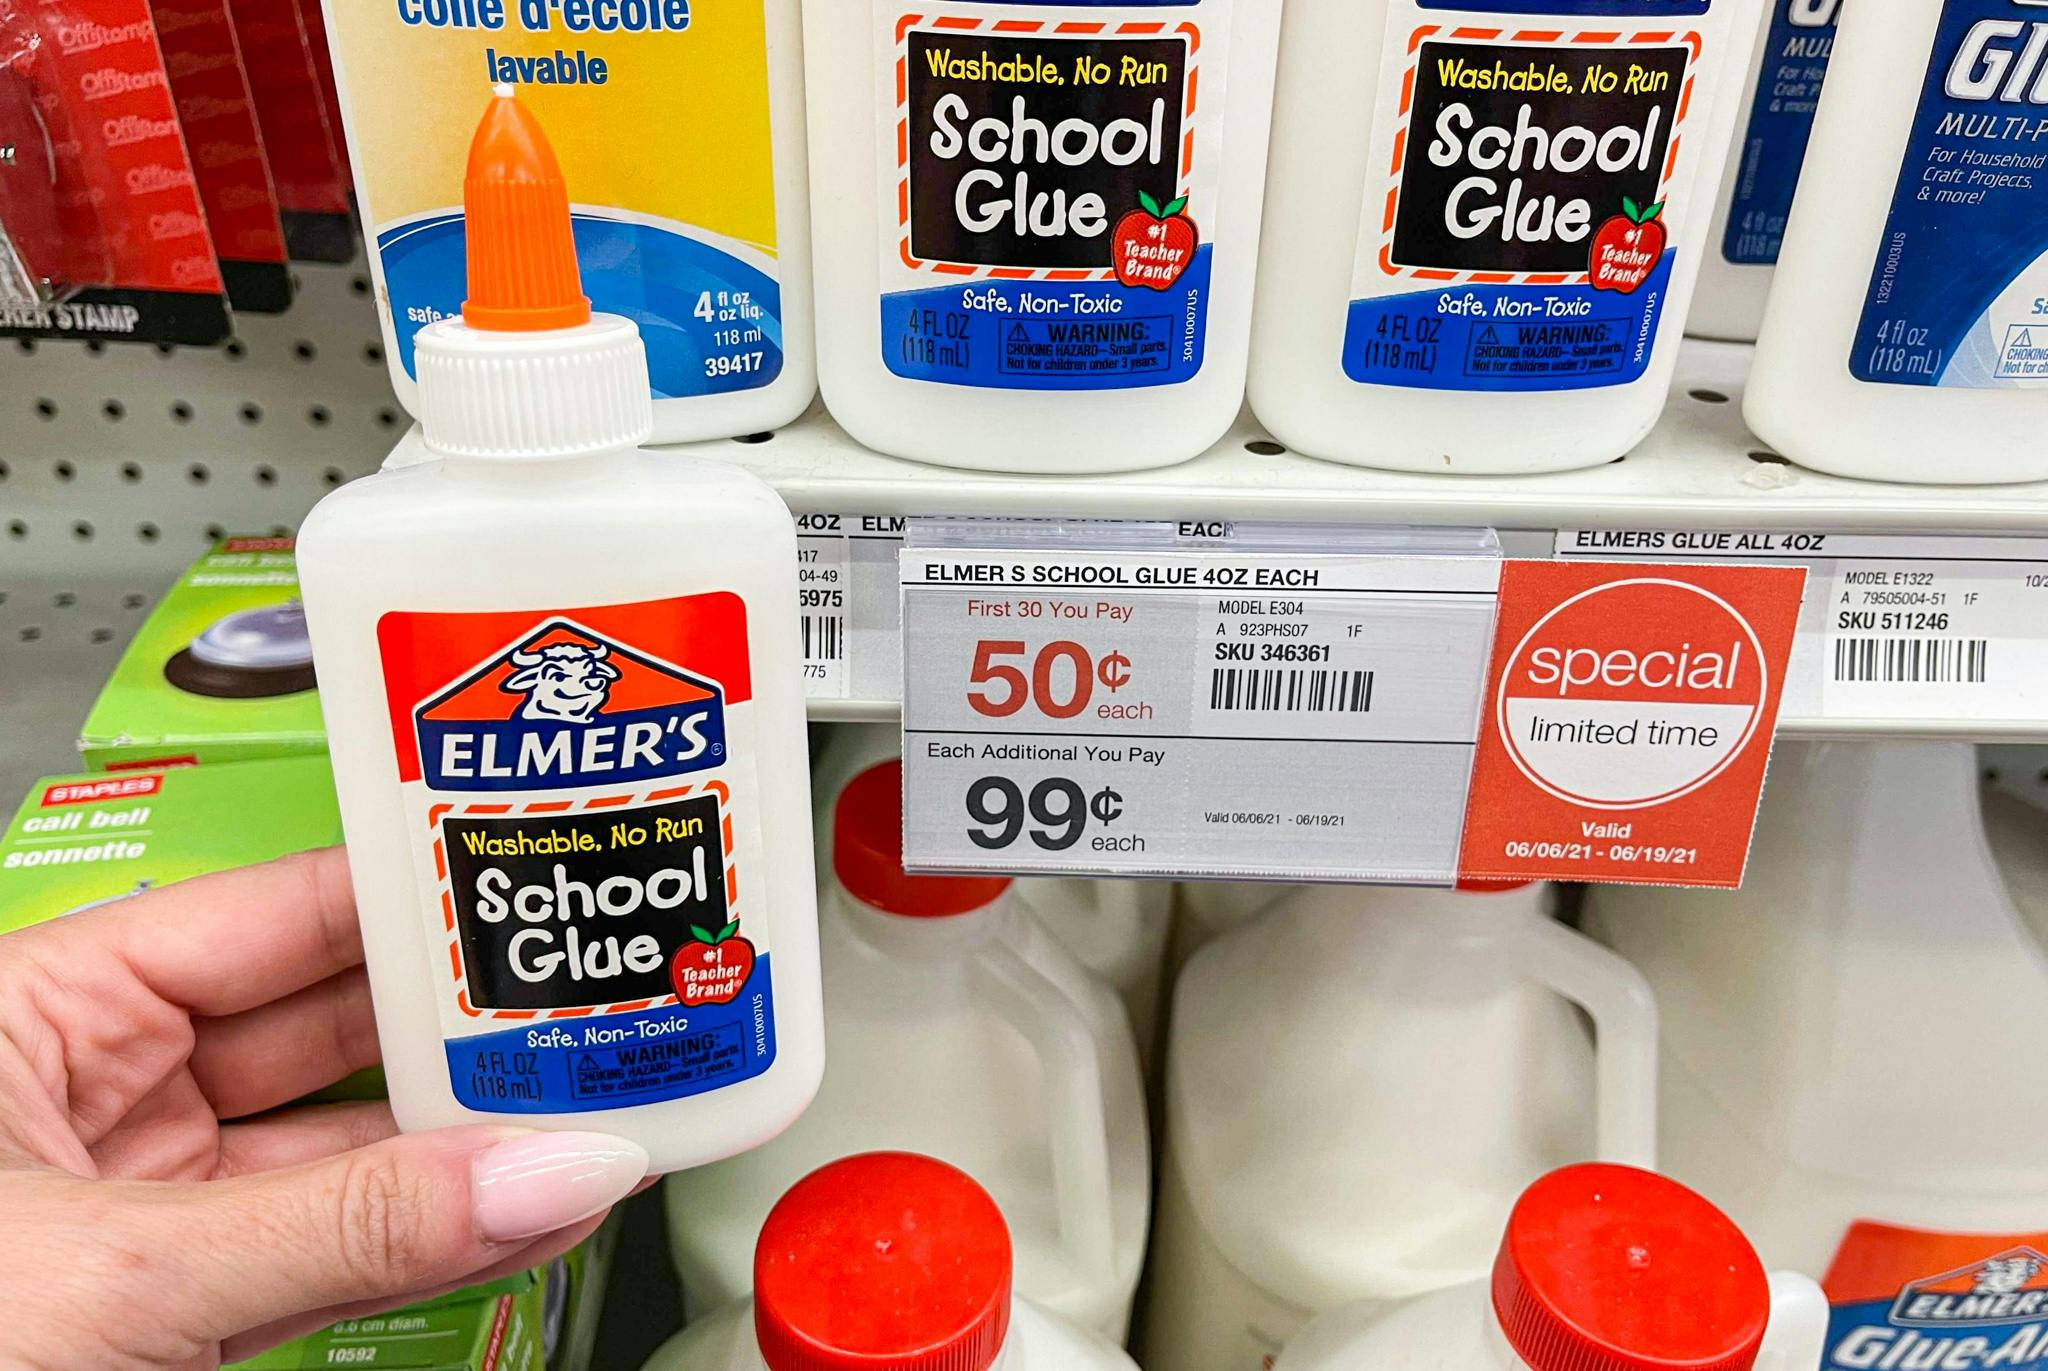 A person's hand holding a bottle of Elmer's school glue next to a shelf with a sale tag advertising a limited time offer at Staples.